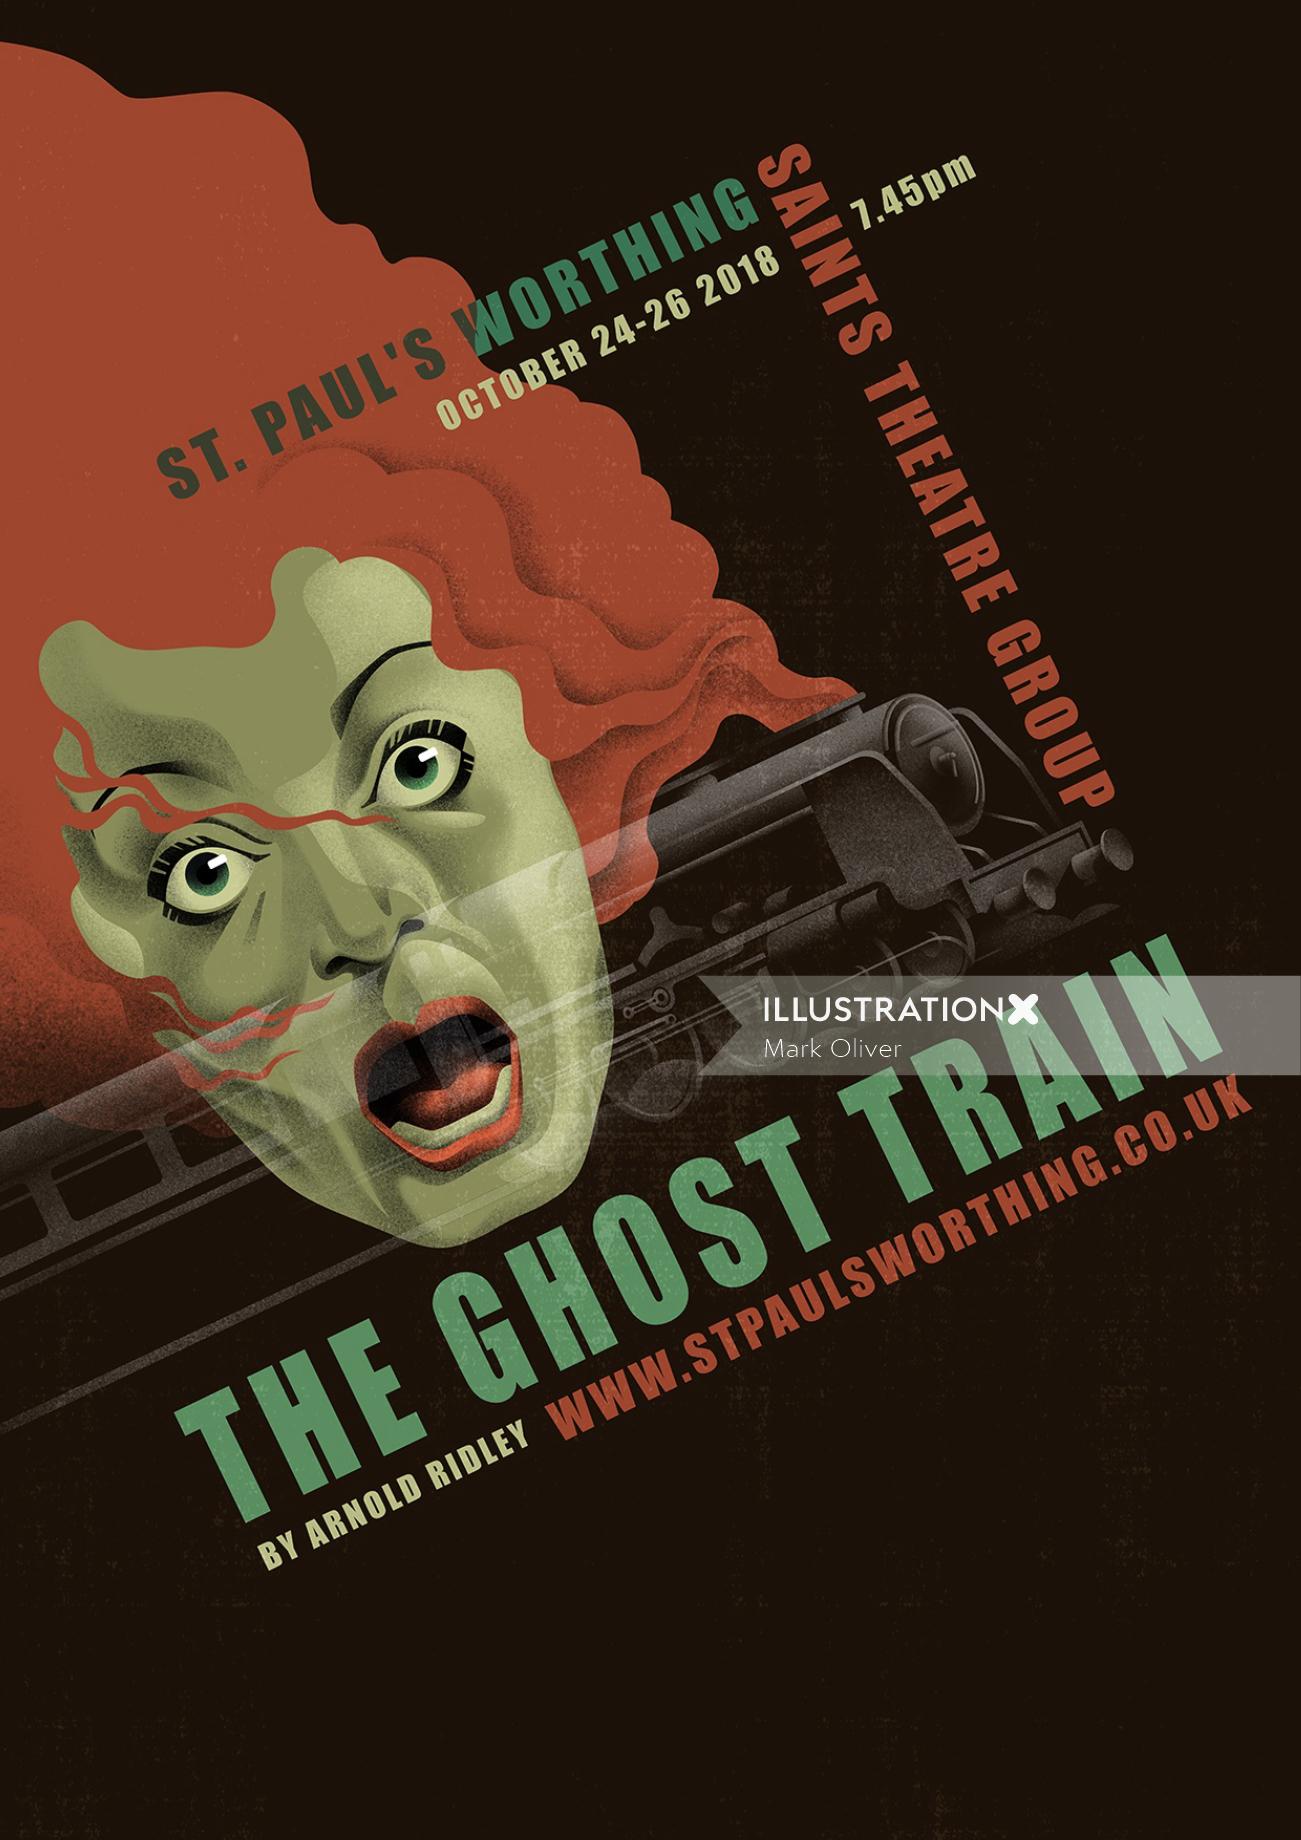 Poster art for The Ghost Train 